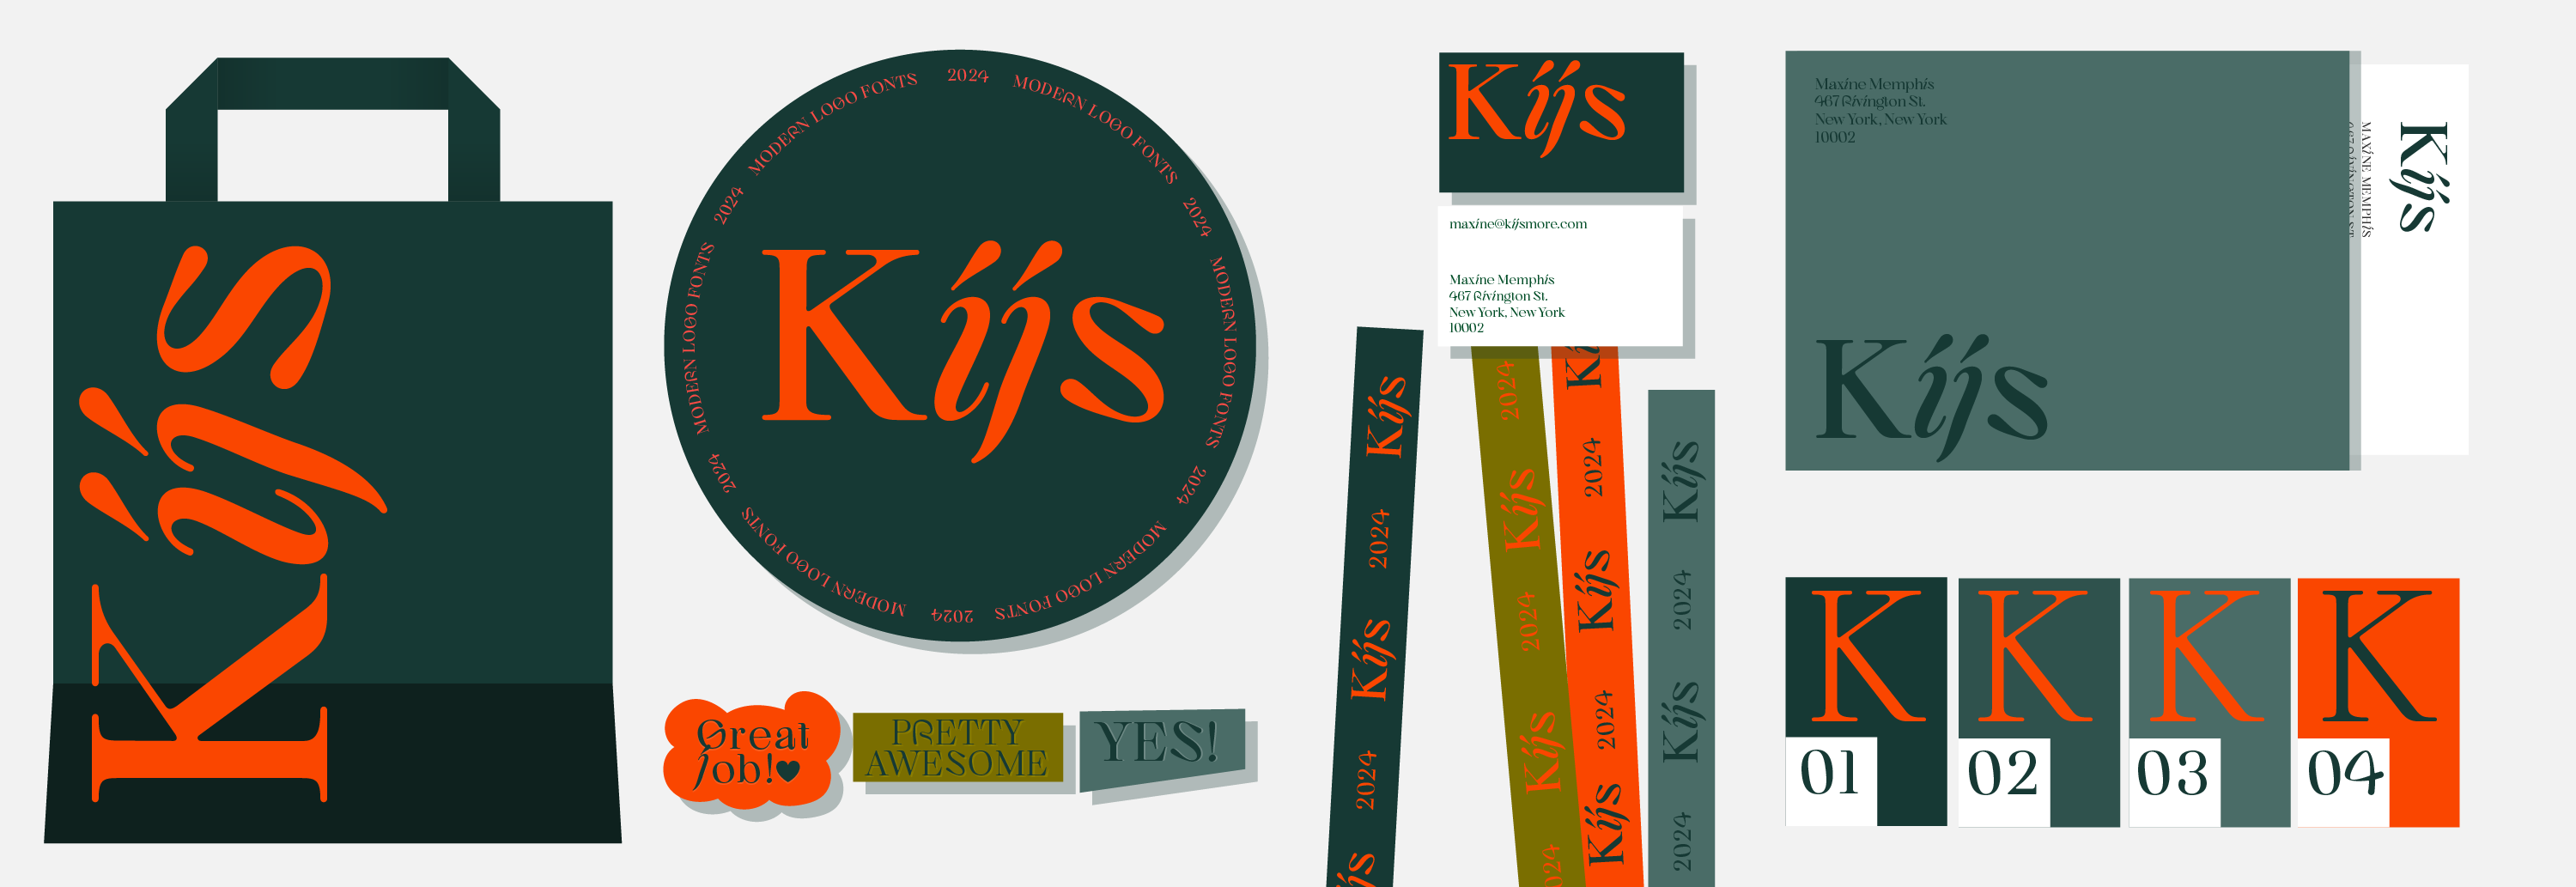 logo and brand kit example for beauty brand